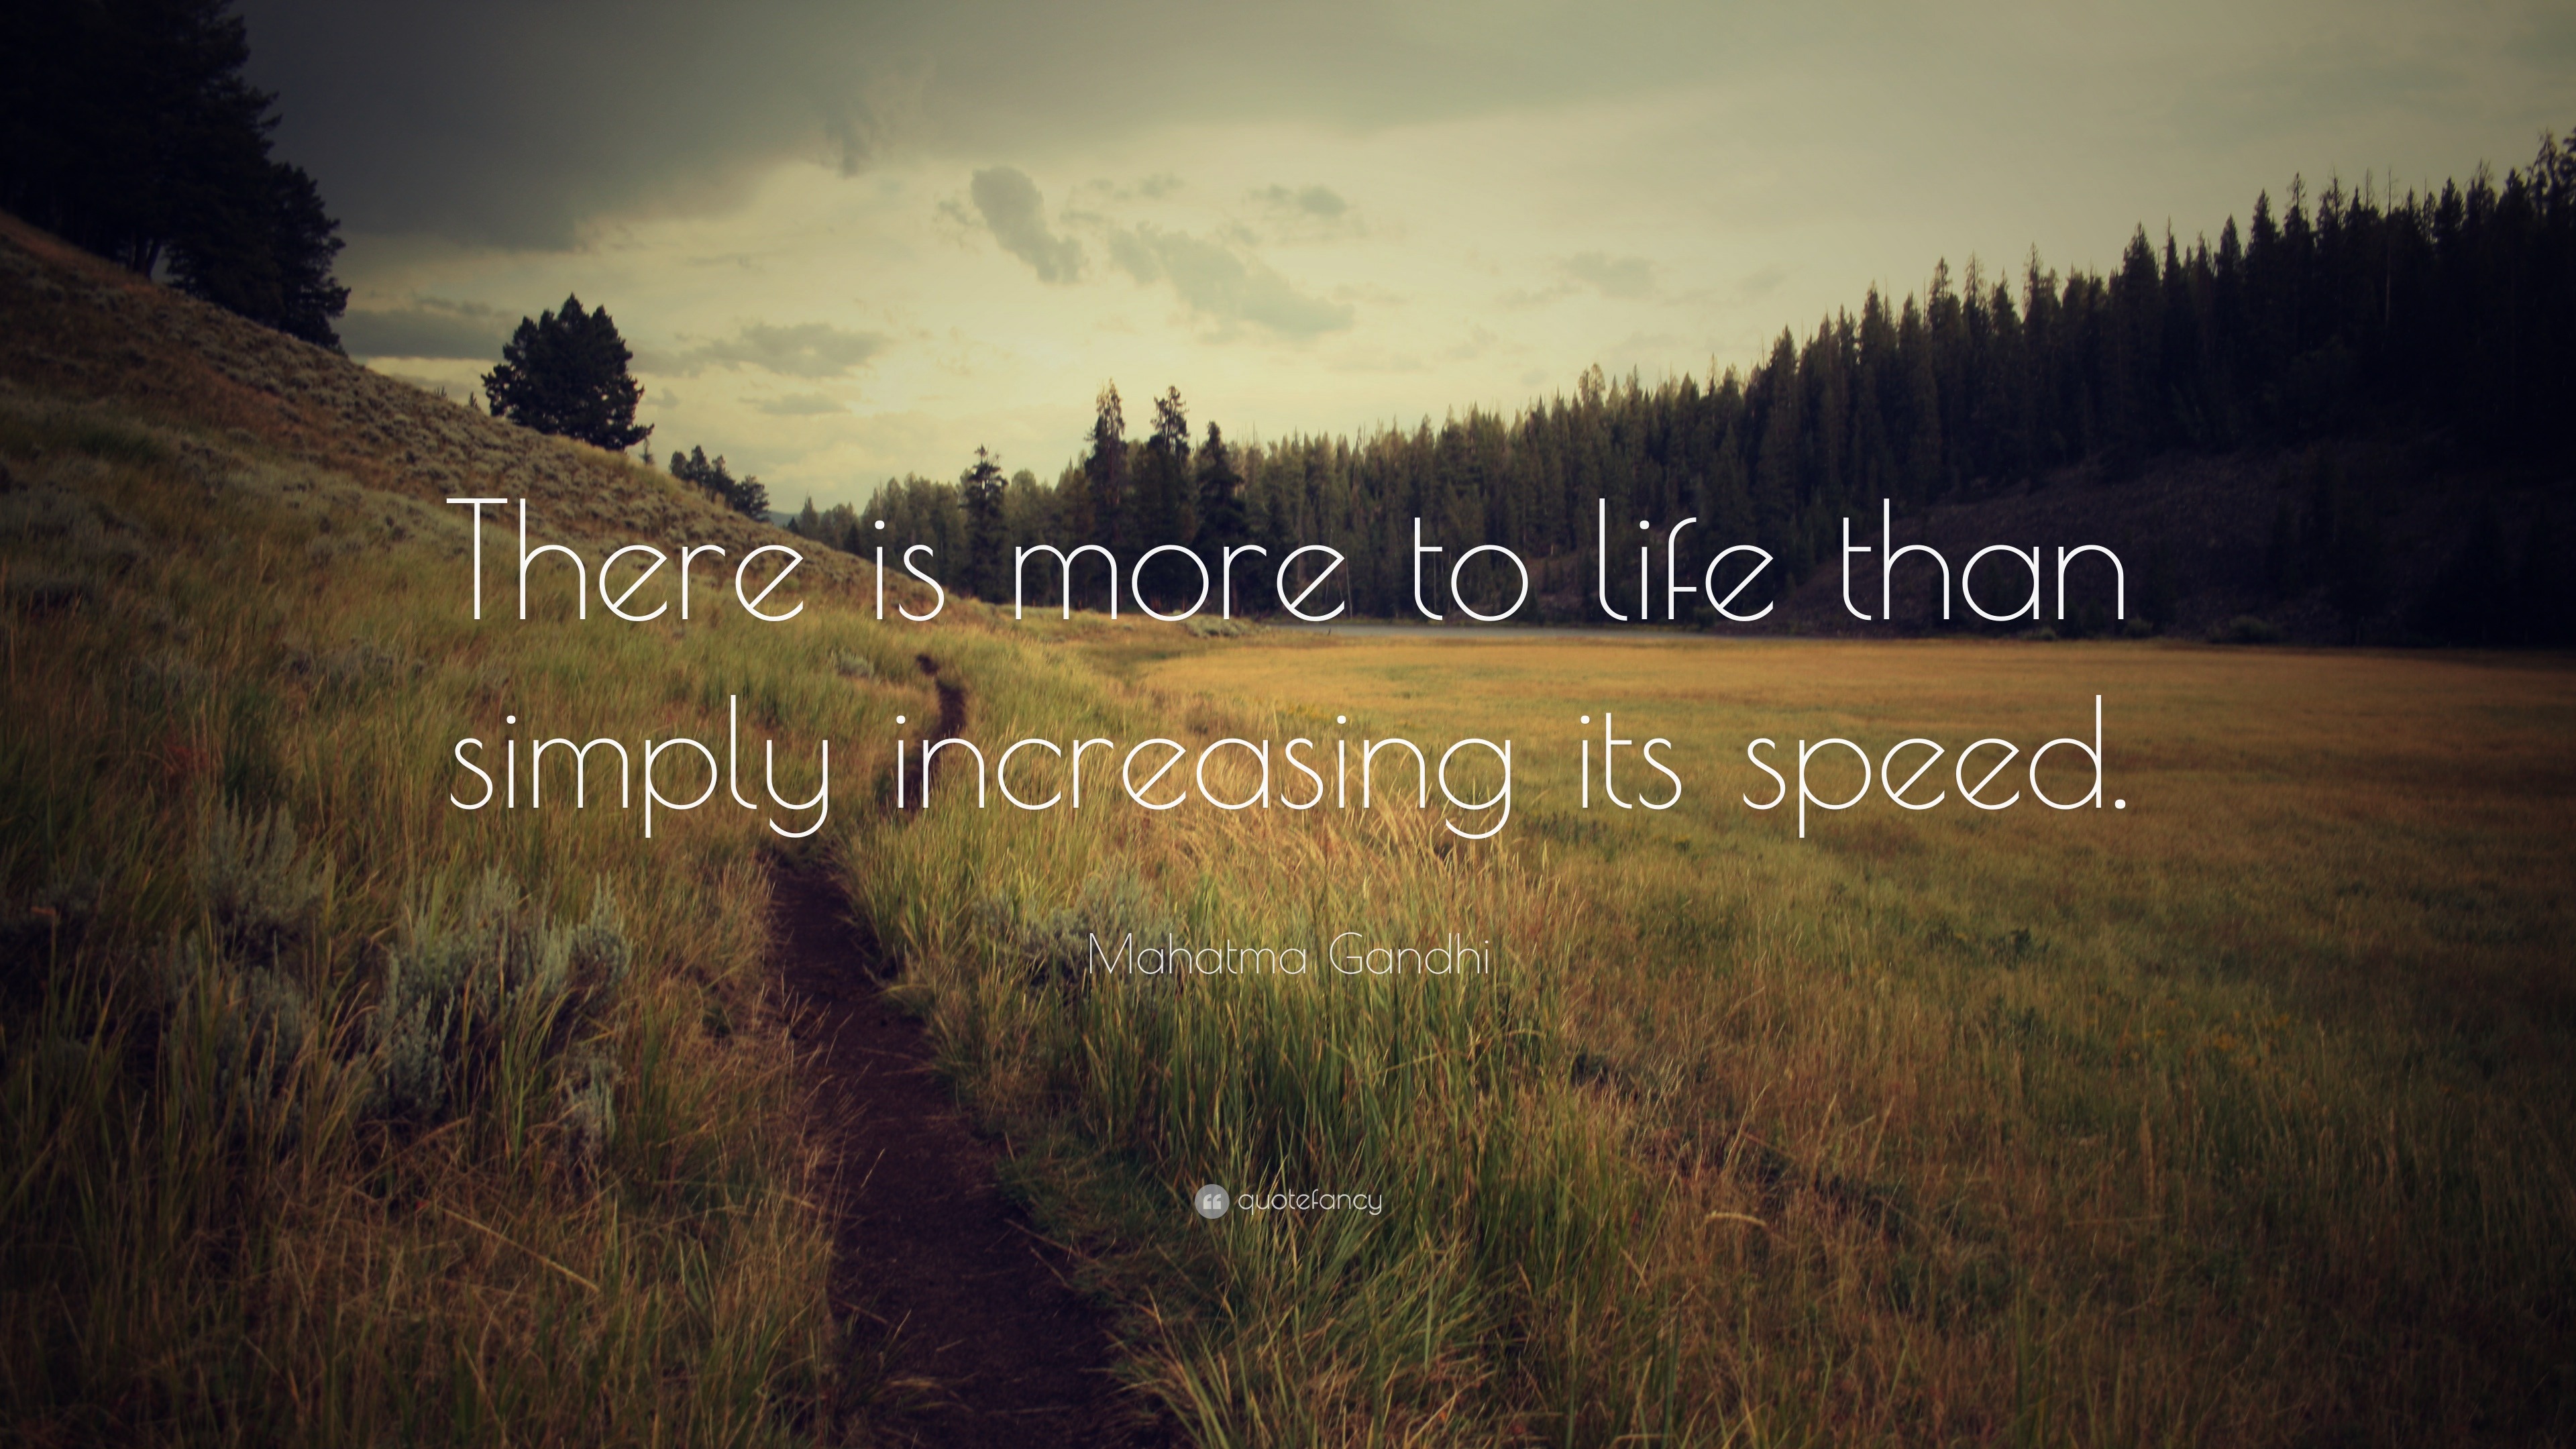 Mahatma Gandhi Quote There Is More To Life Than Simply Increasing Its Speed